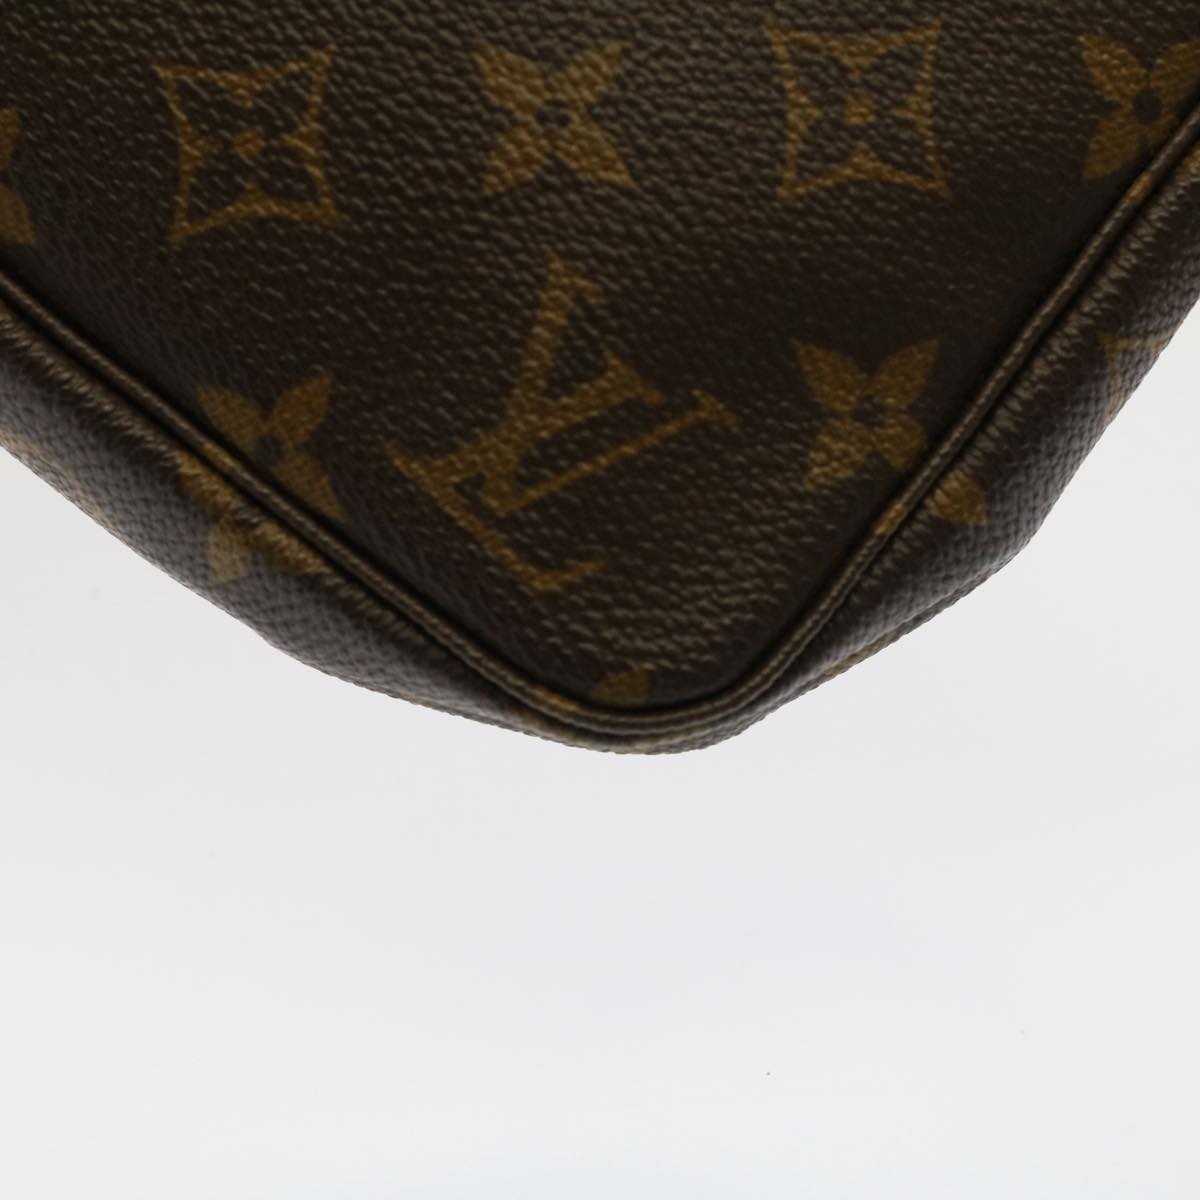 Louis Vuitton Women's Monogram Canvas Pouch with Protective Bag in Brown